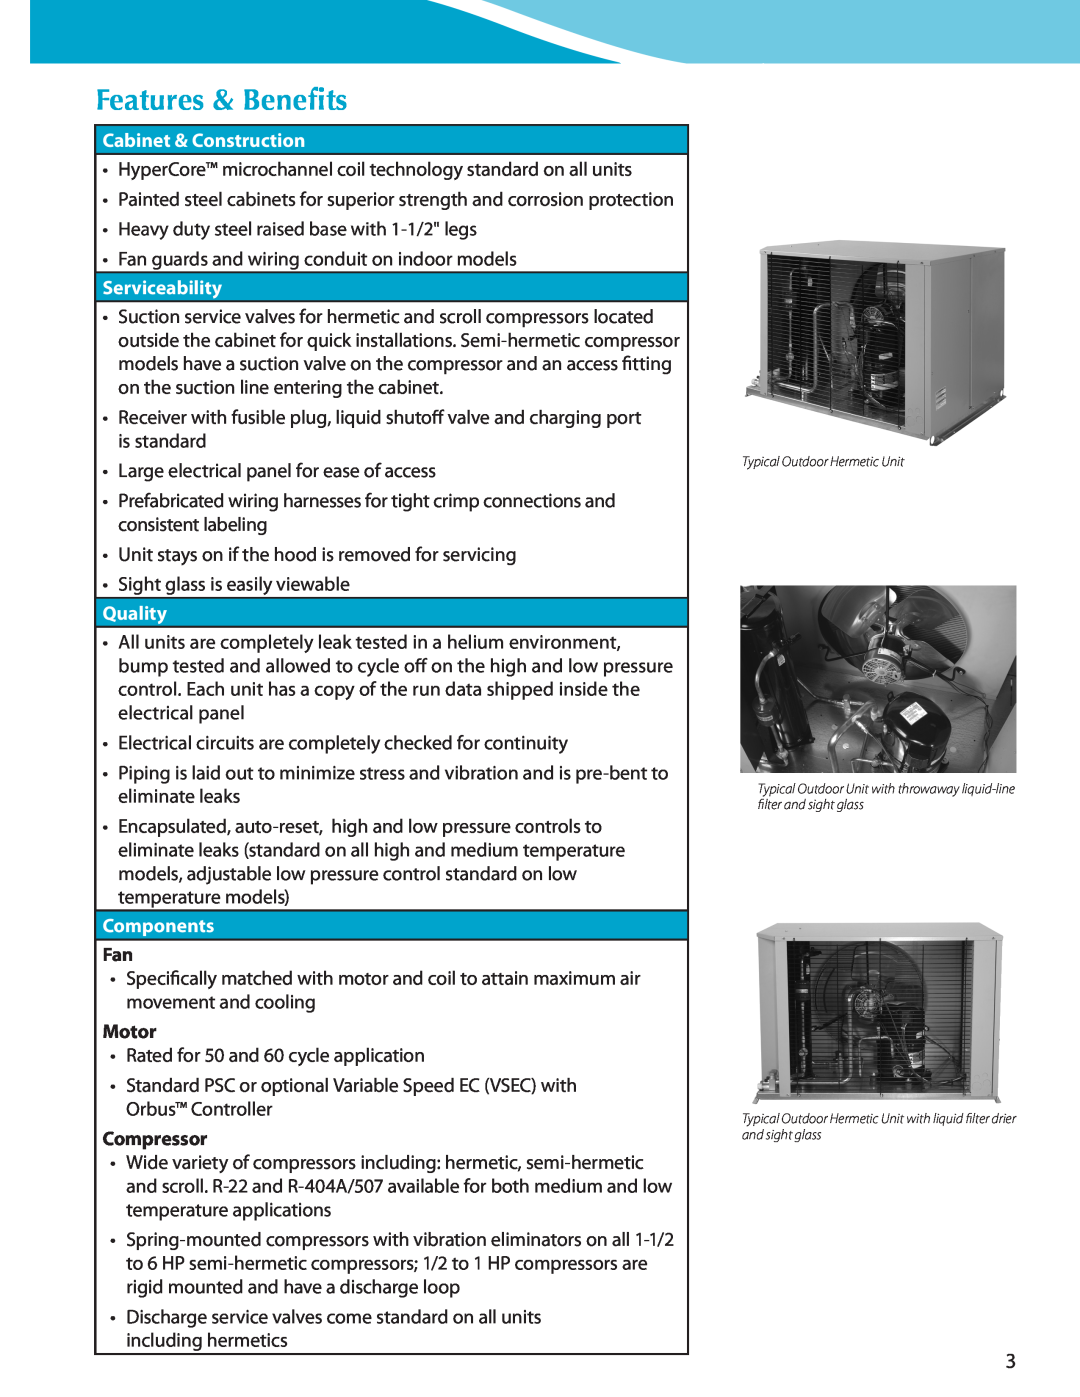 Heatcraft Refrigeration Products CC-HTSTB Features & Benefits, Cabinet & Construction, Serviceability, Quality, Components 